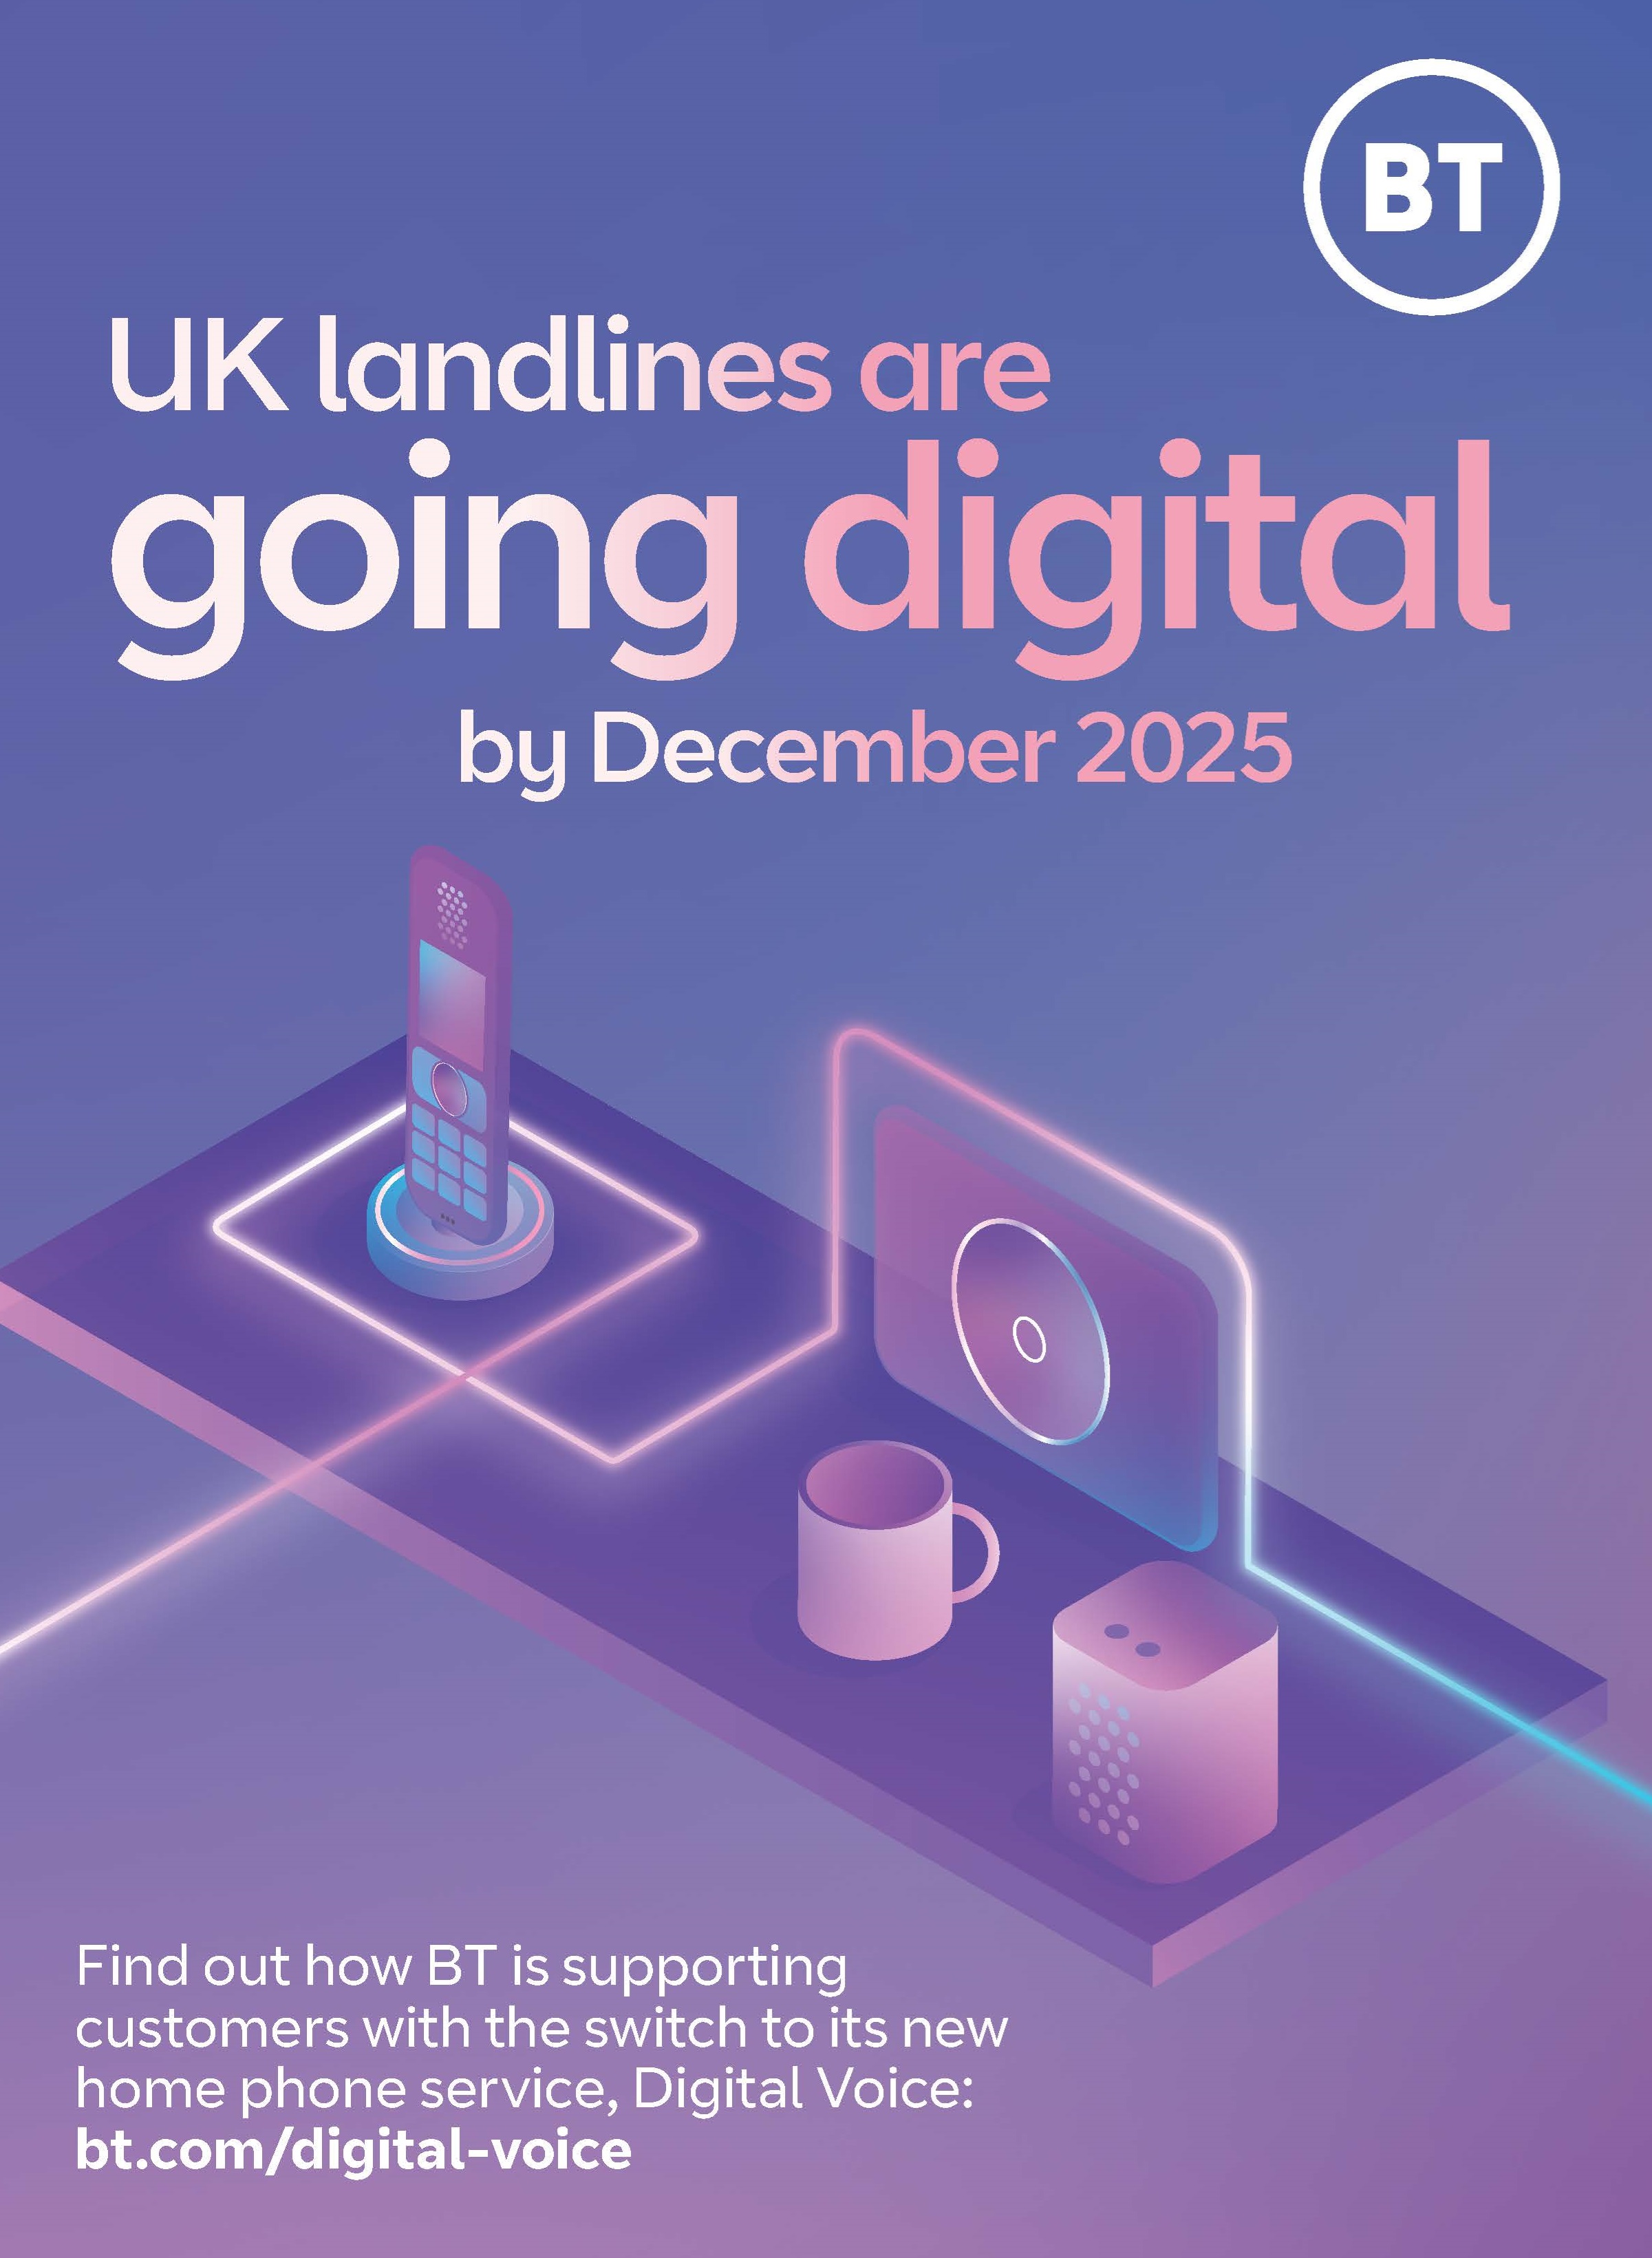 Poster showing digital items on a table alongside a cup of coffee. With text sharing: UK landlines are going digital by December 2025. Find out how BT is supporting customers with the switch to its new home phone service, Digital Voice: bt.com/digital-voice